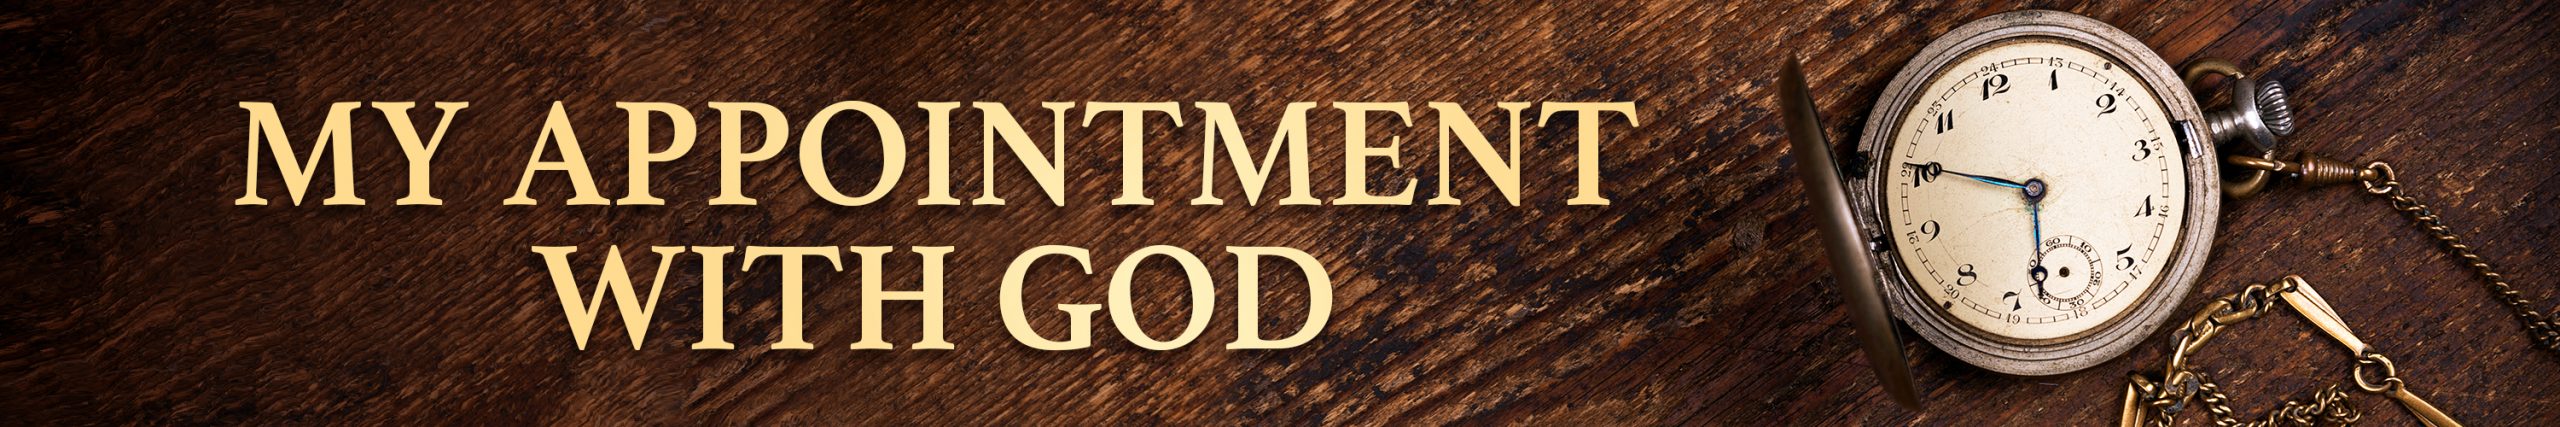 My Appointment with God